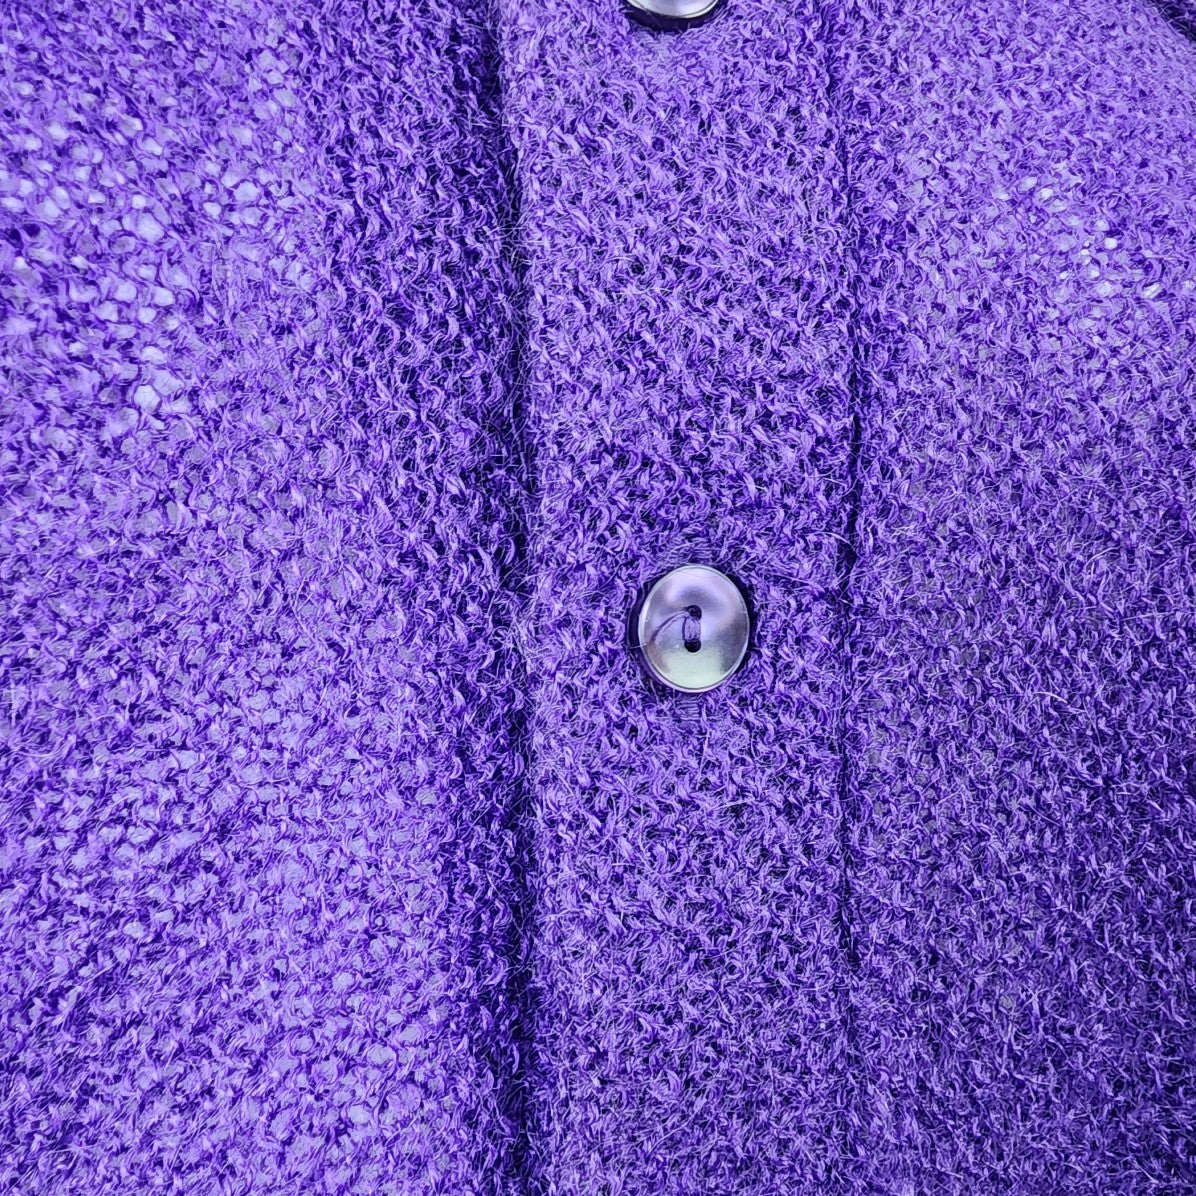 Vintage 70s White Ram Purple Mohair Wool Button Up Cardigan Size L